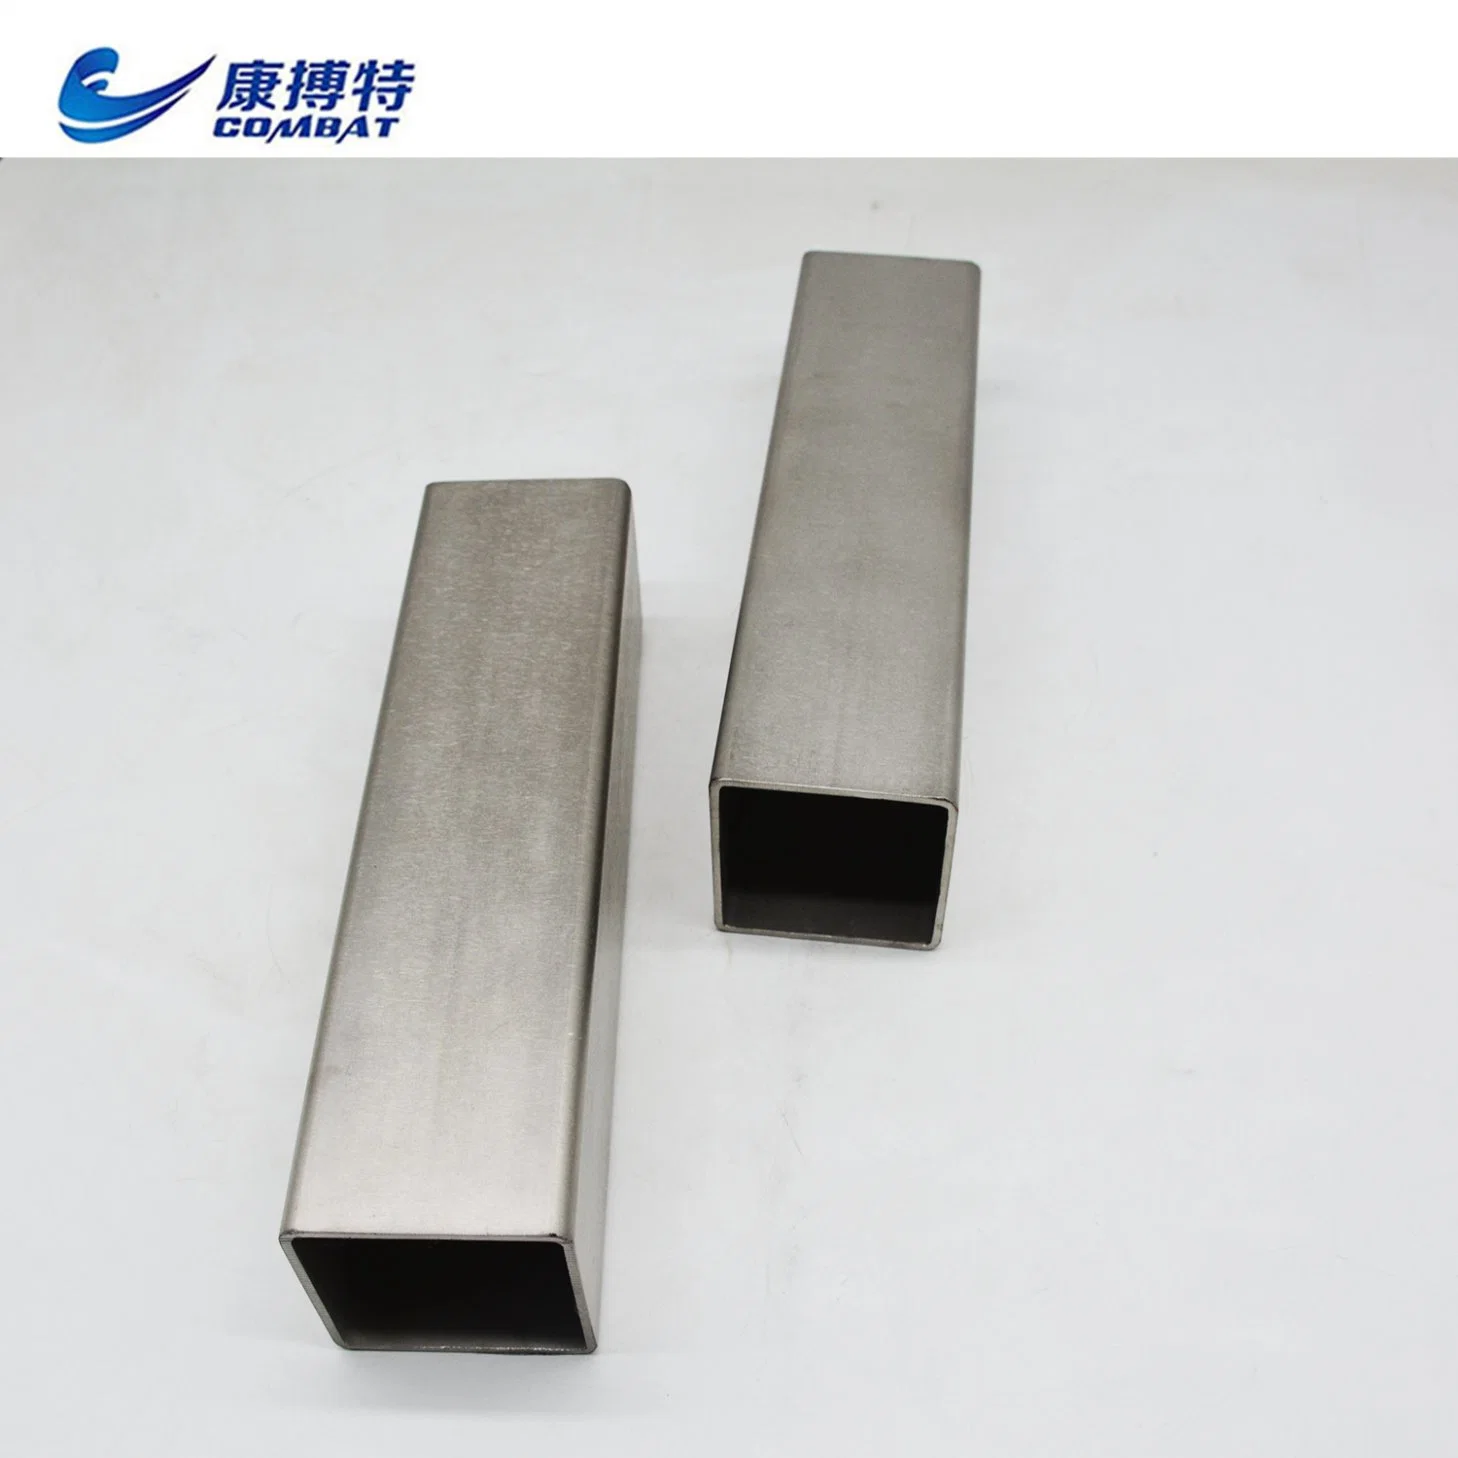 4.51g/cm3 Seamless/Forged/Rolled 6mm Rod Titanium Pipe Gr1, Gr2, Gr3, Gr4, Gr5, Gr7, Gr9, Gr12, Gr23, etc